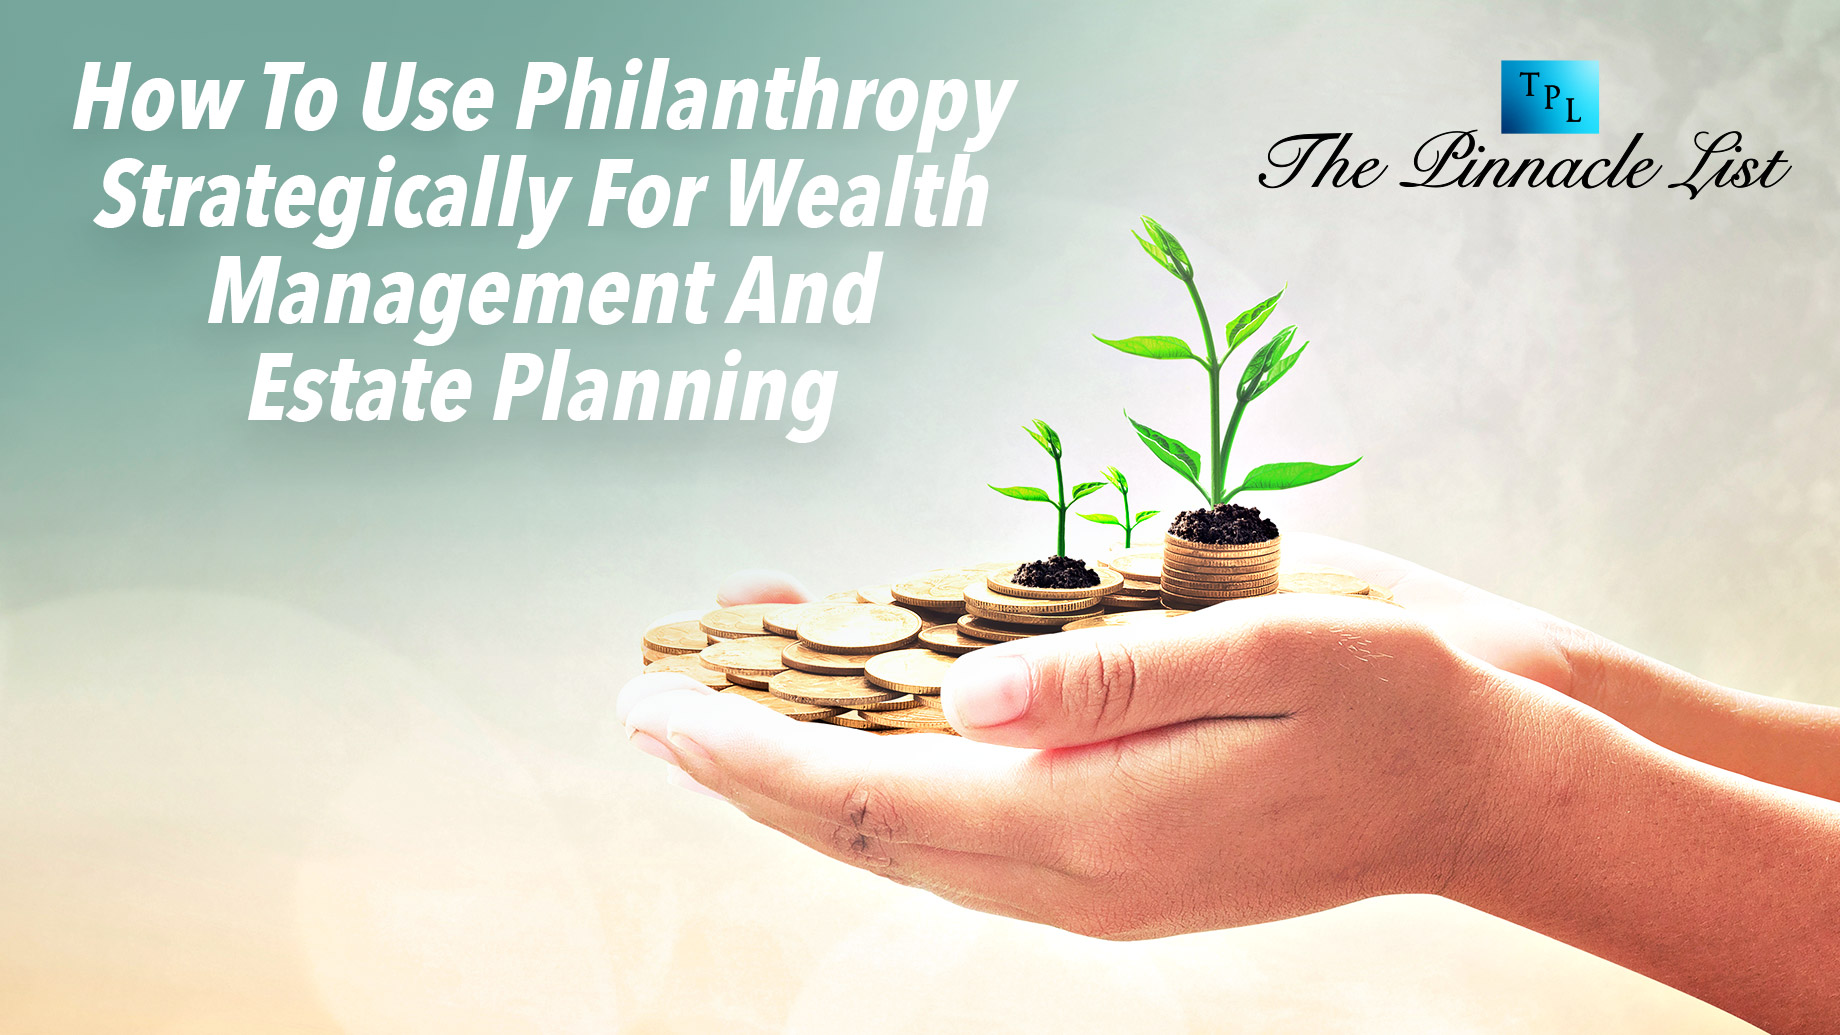 How To Use Philanthropy Strategically For Wealth Management And Estate Planning